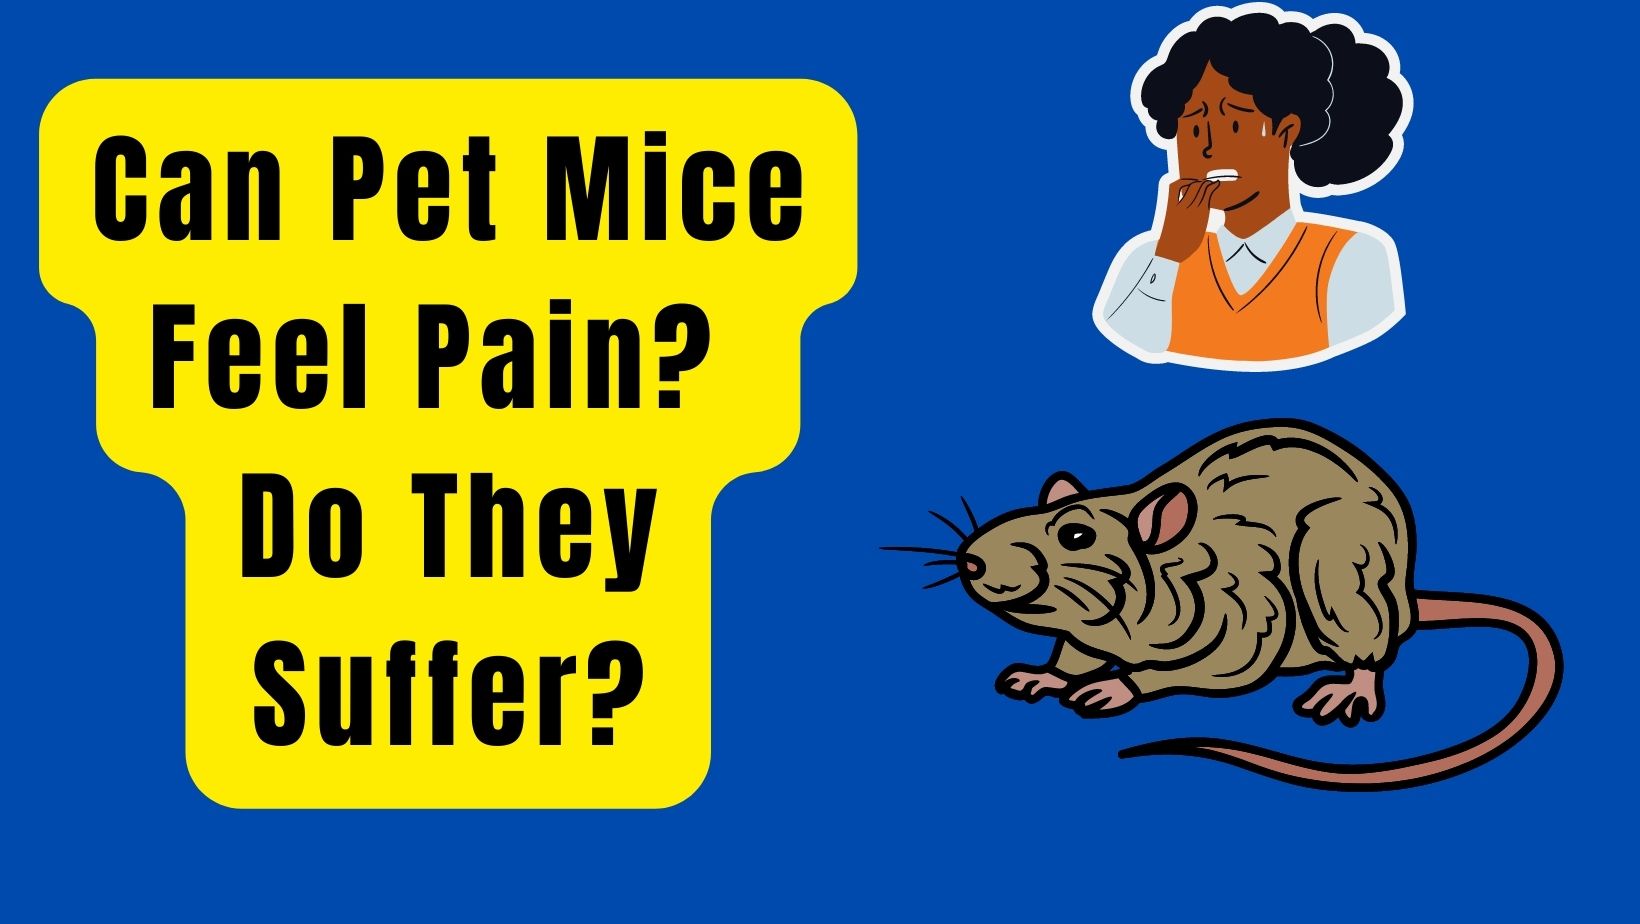 Can Pet Mice Feel Pain Do They Suffer